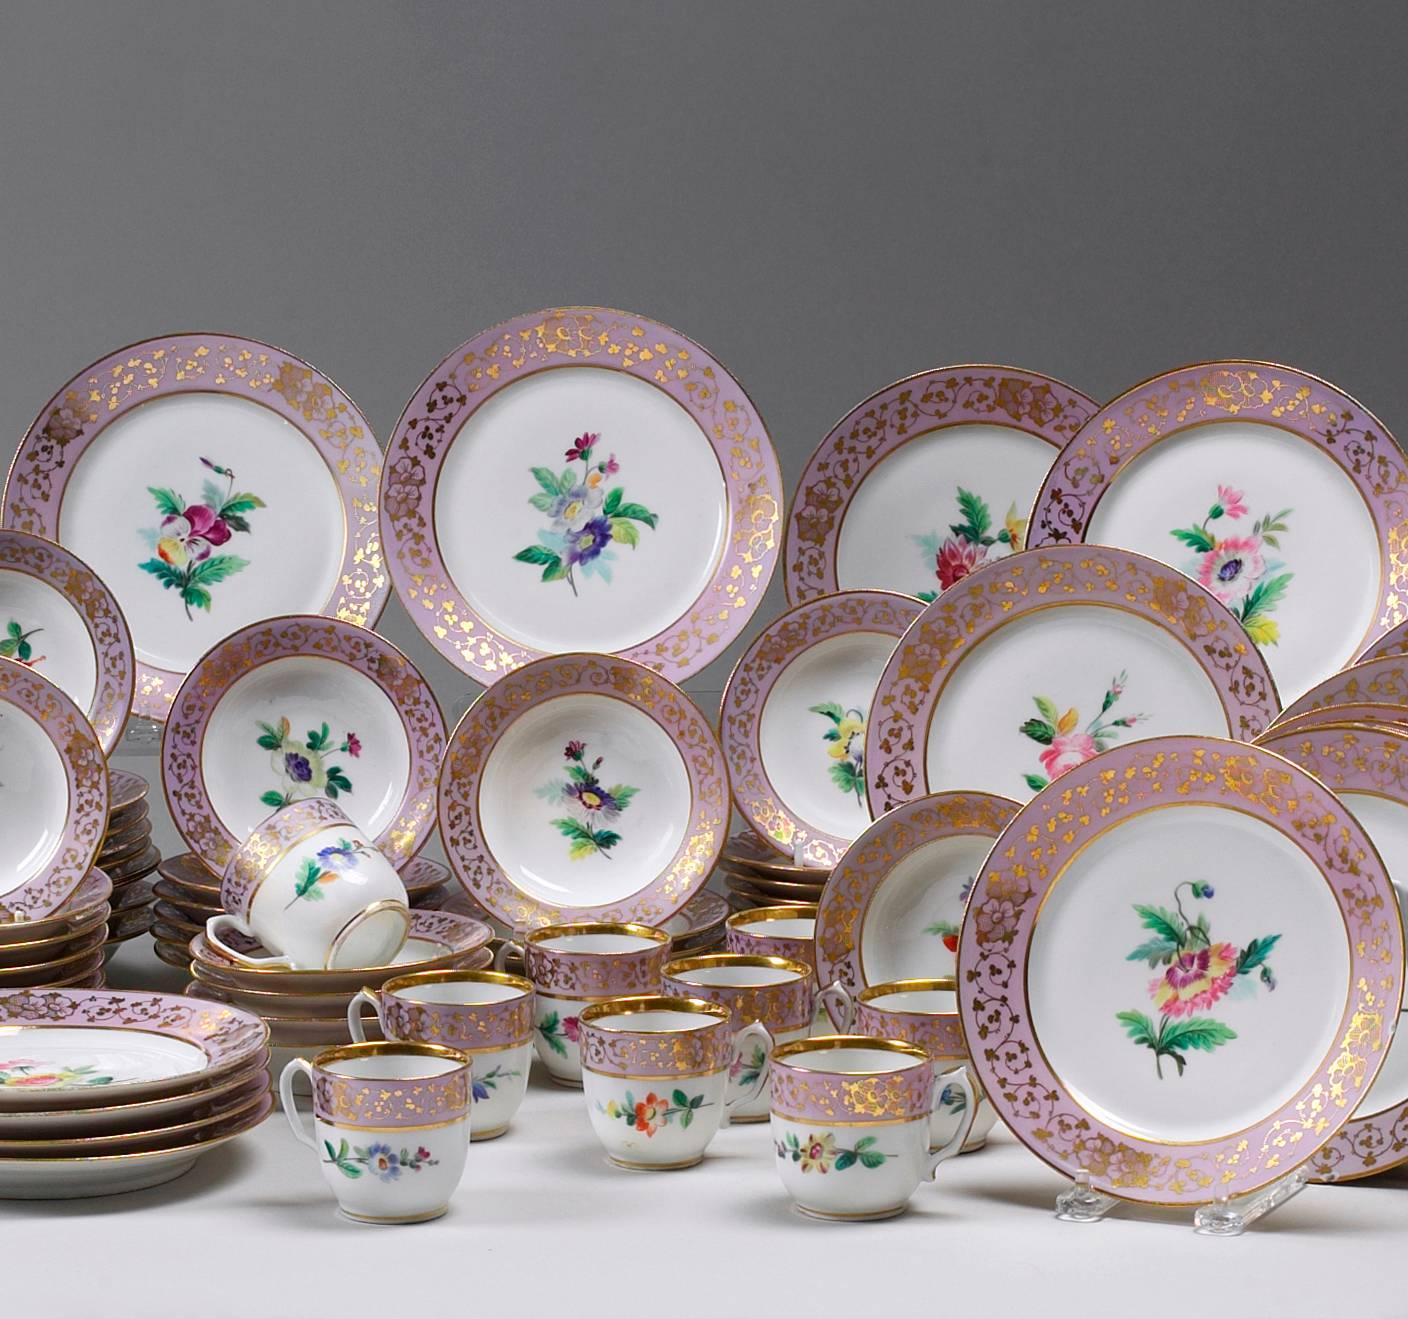 15 dinner plates, 9 inches diameter, with floral painting.
12 dessert plates, 8 1/4 inches diameter, with floral painting.
Eight soup plates, - 9 3/4 inches diameter, with floral painting.
12 dessert plates painted with fruit.
Nine coffee cups,